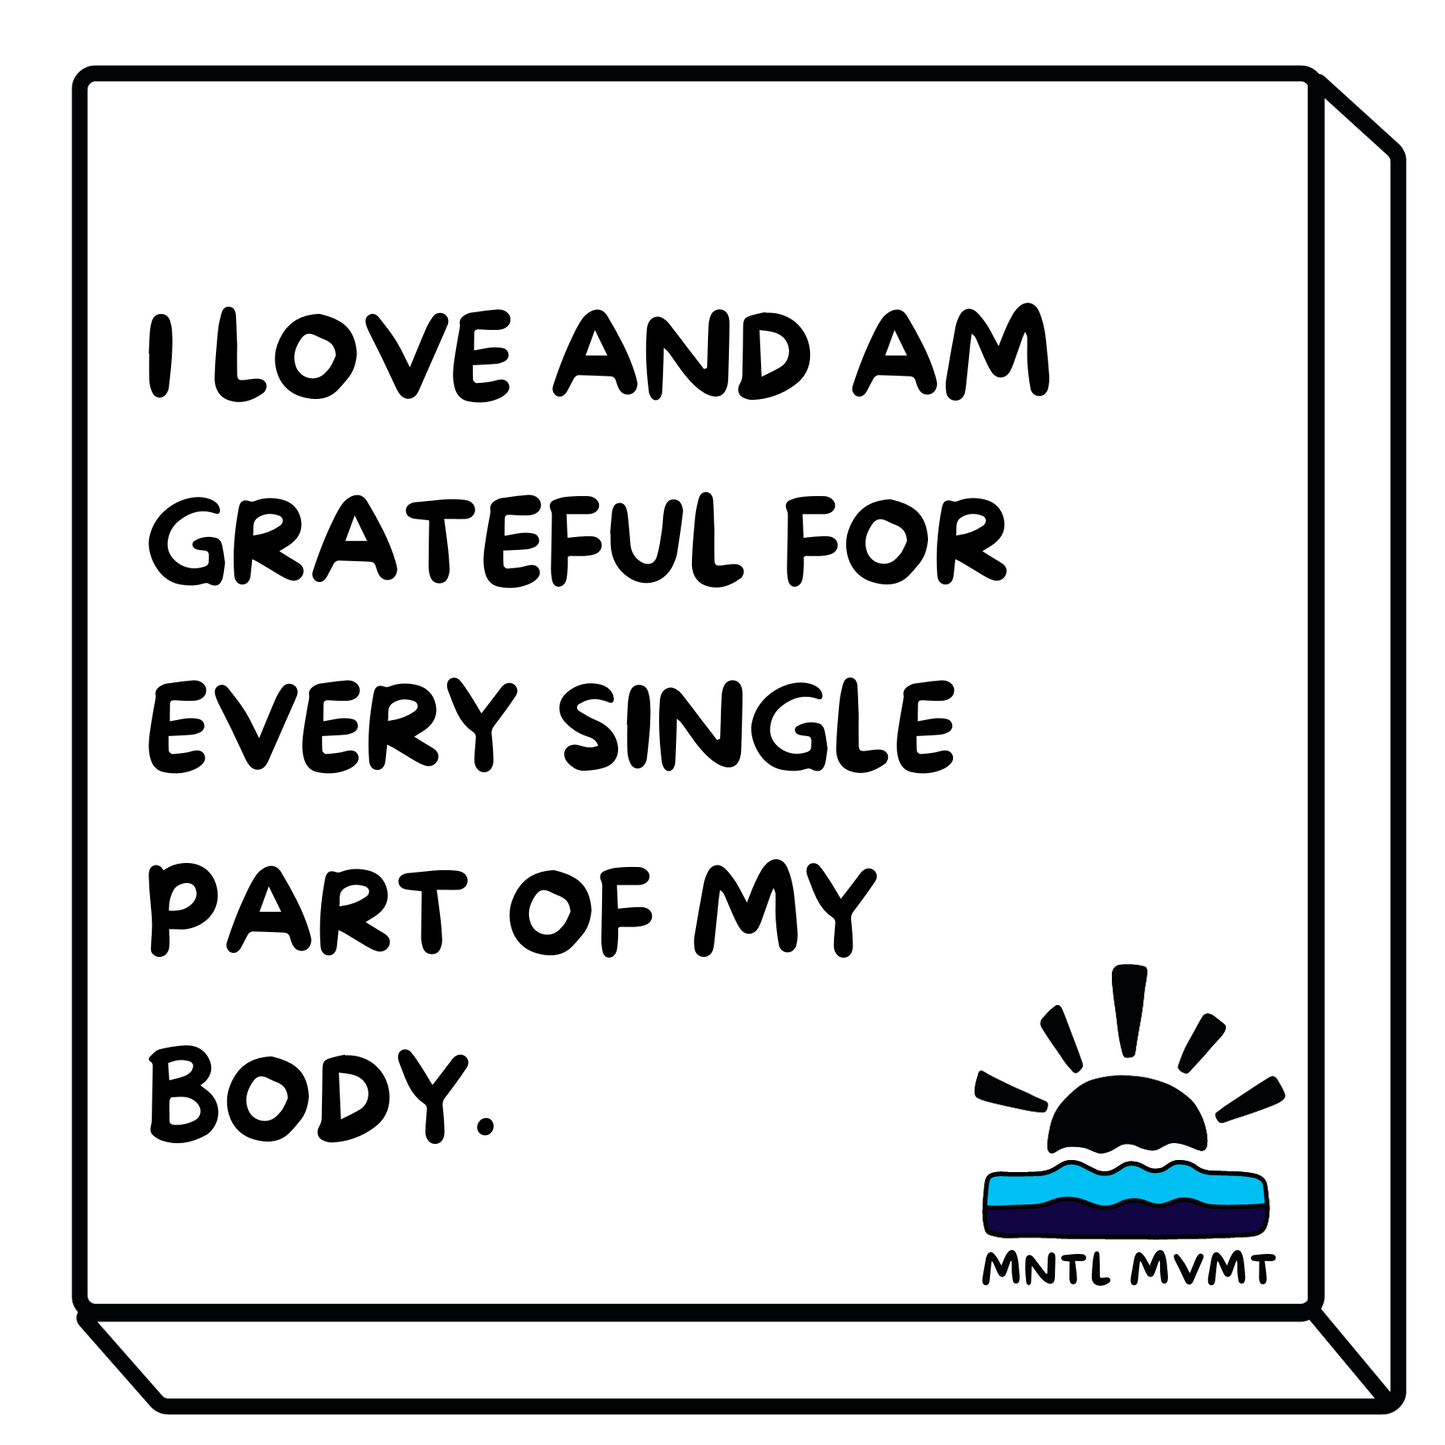 I LOVE AND AM GRATEFUL FOR EVERY SINGLE PART OF MY BODY.